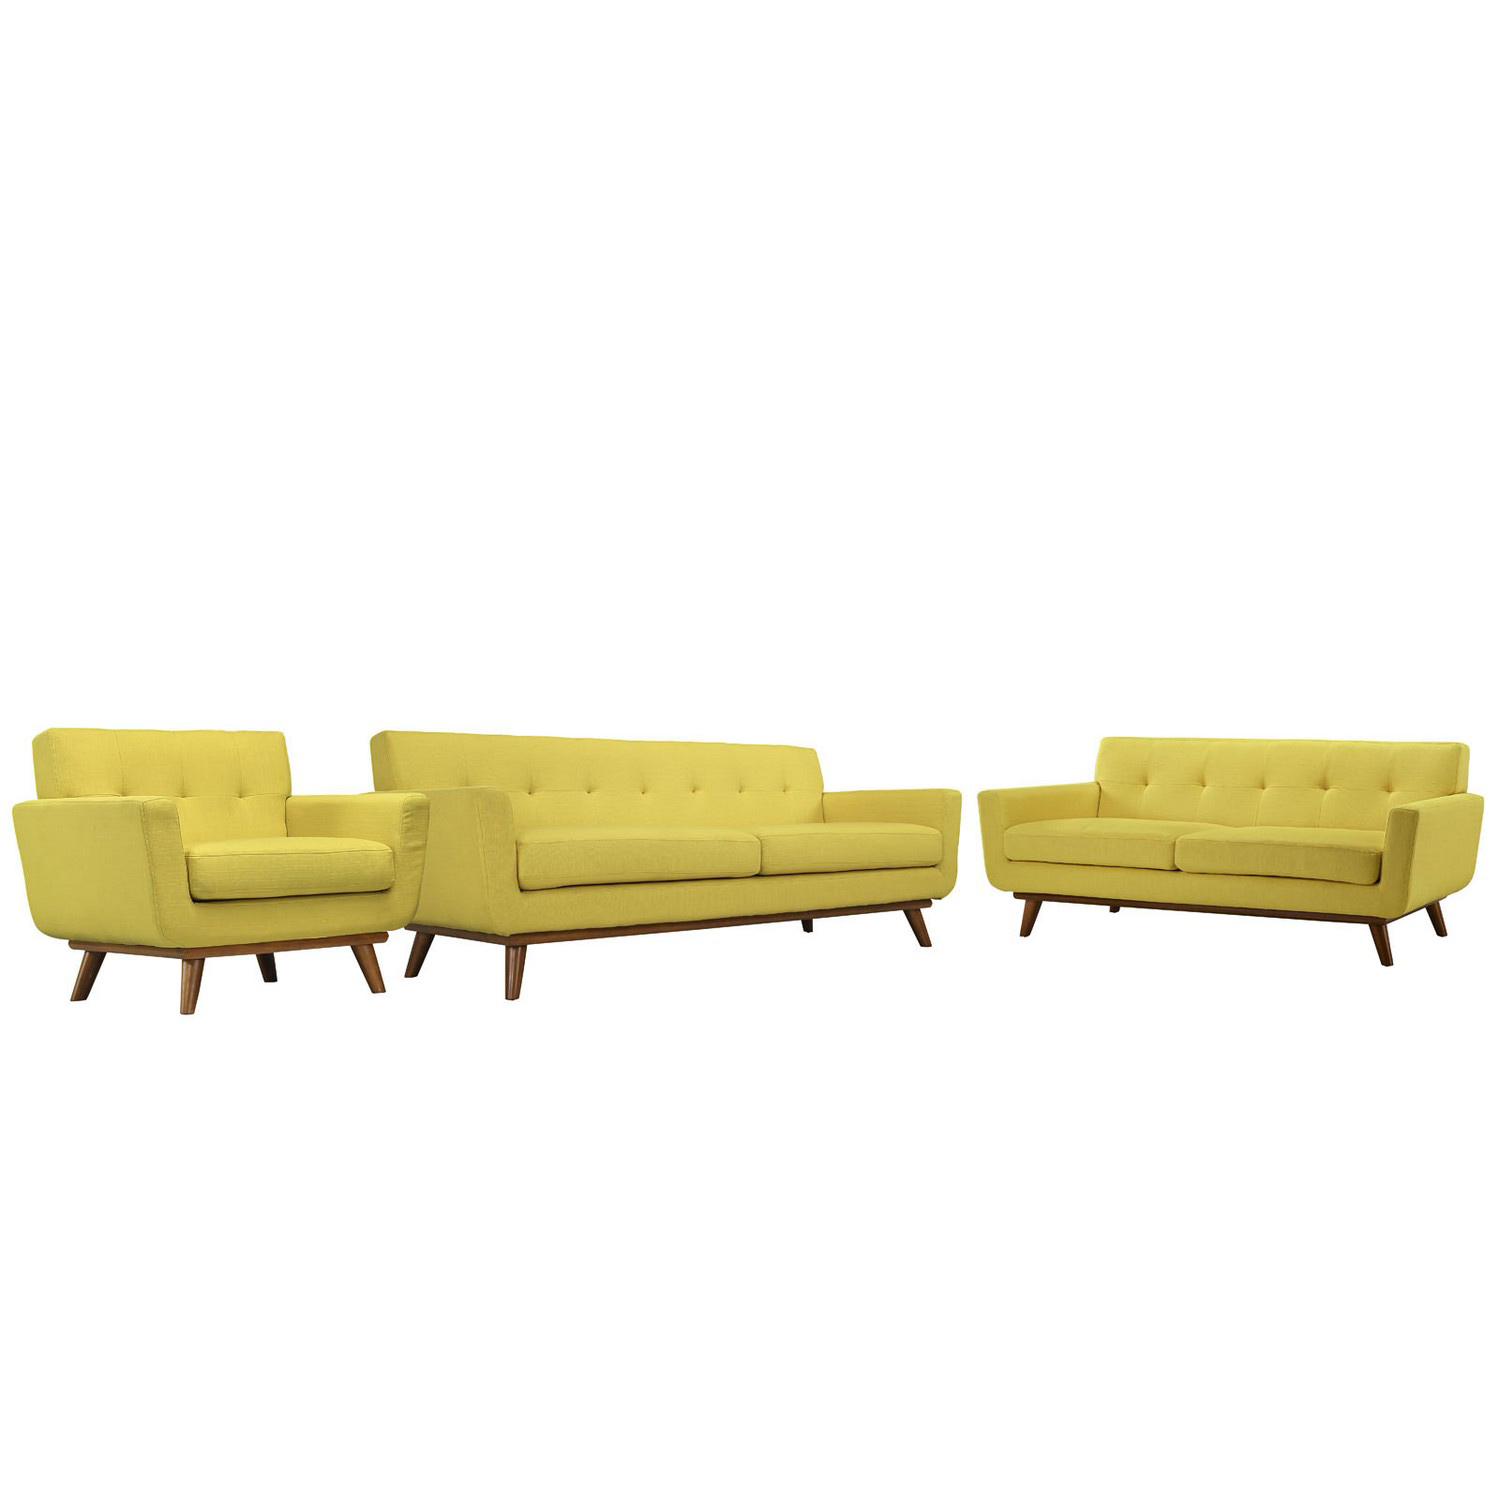 Modway Engage 3 PC Sofa Loveseat and Armchair Set - Sunny